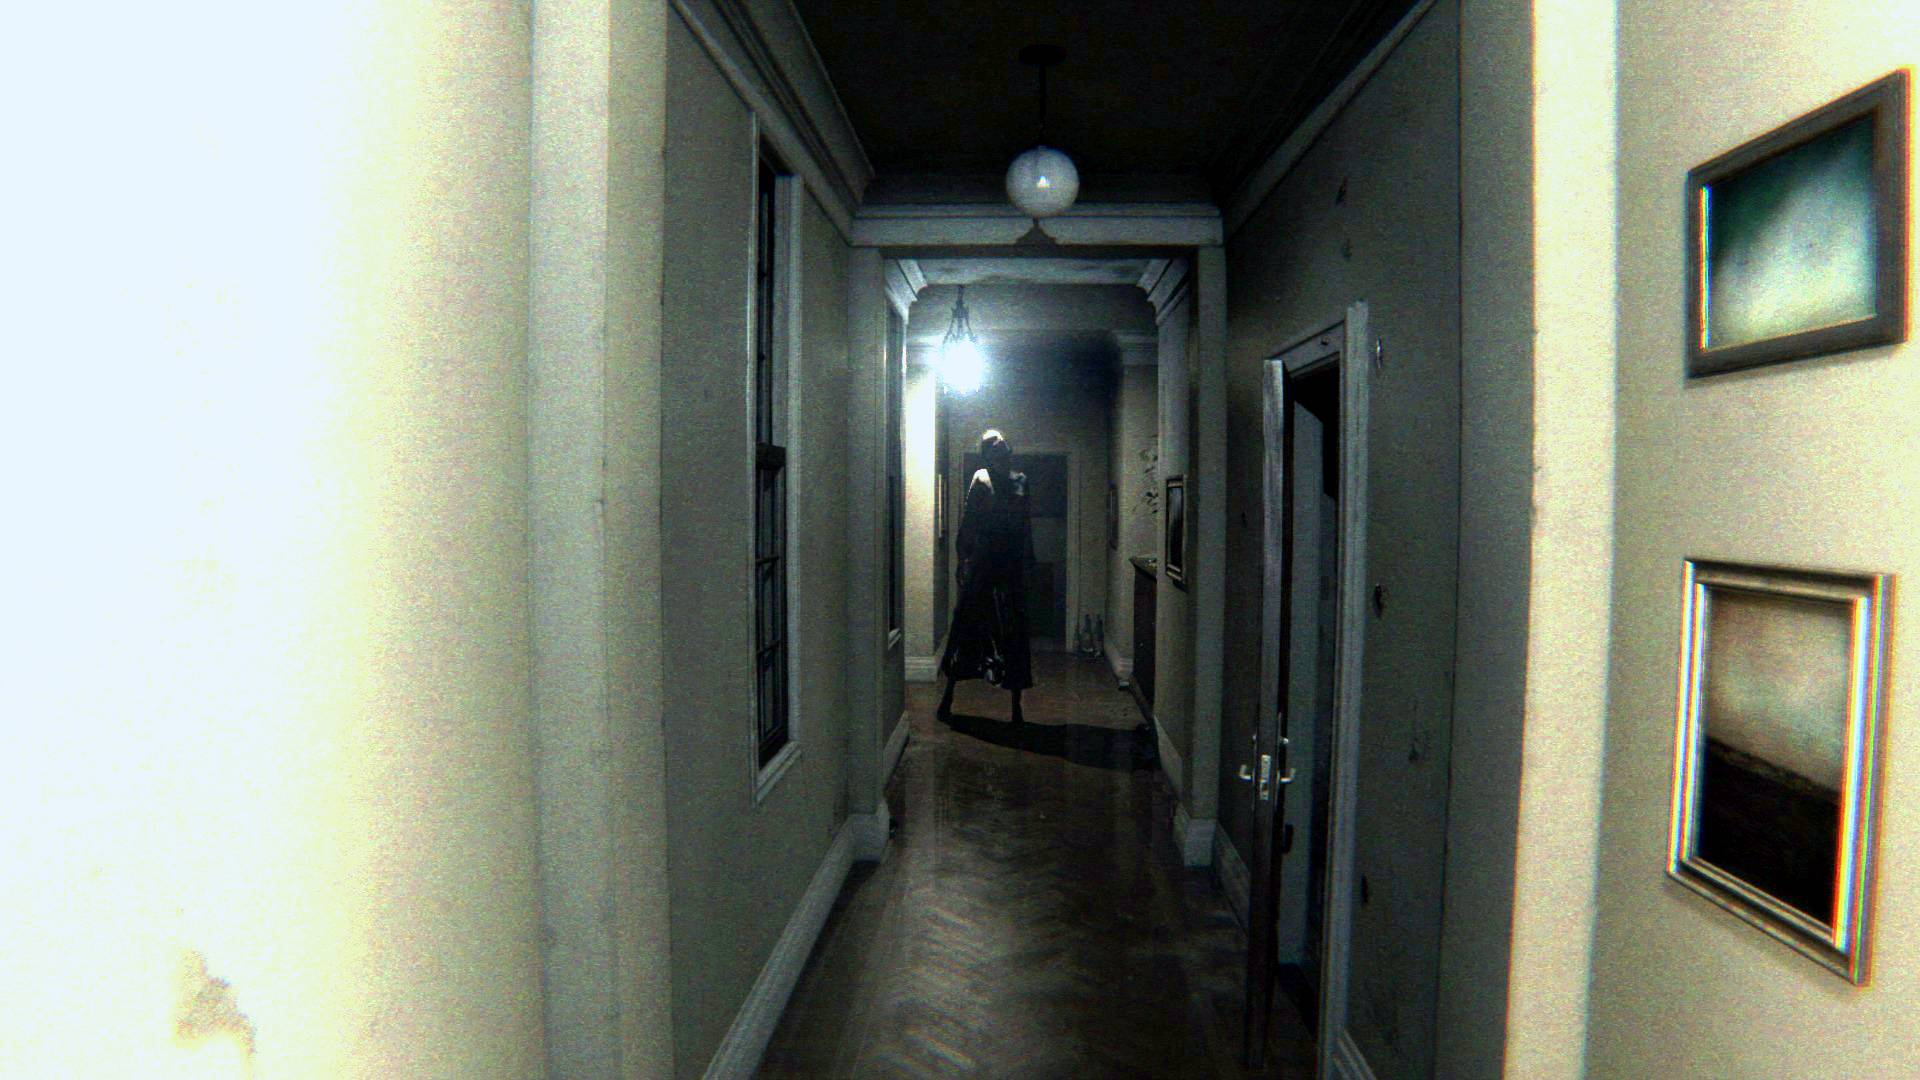 P.T. Remake For PC Is Now Available To Download And Play